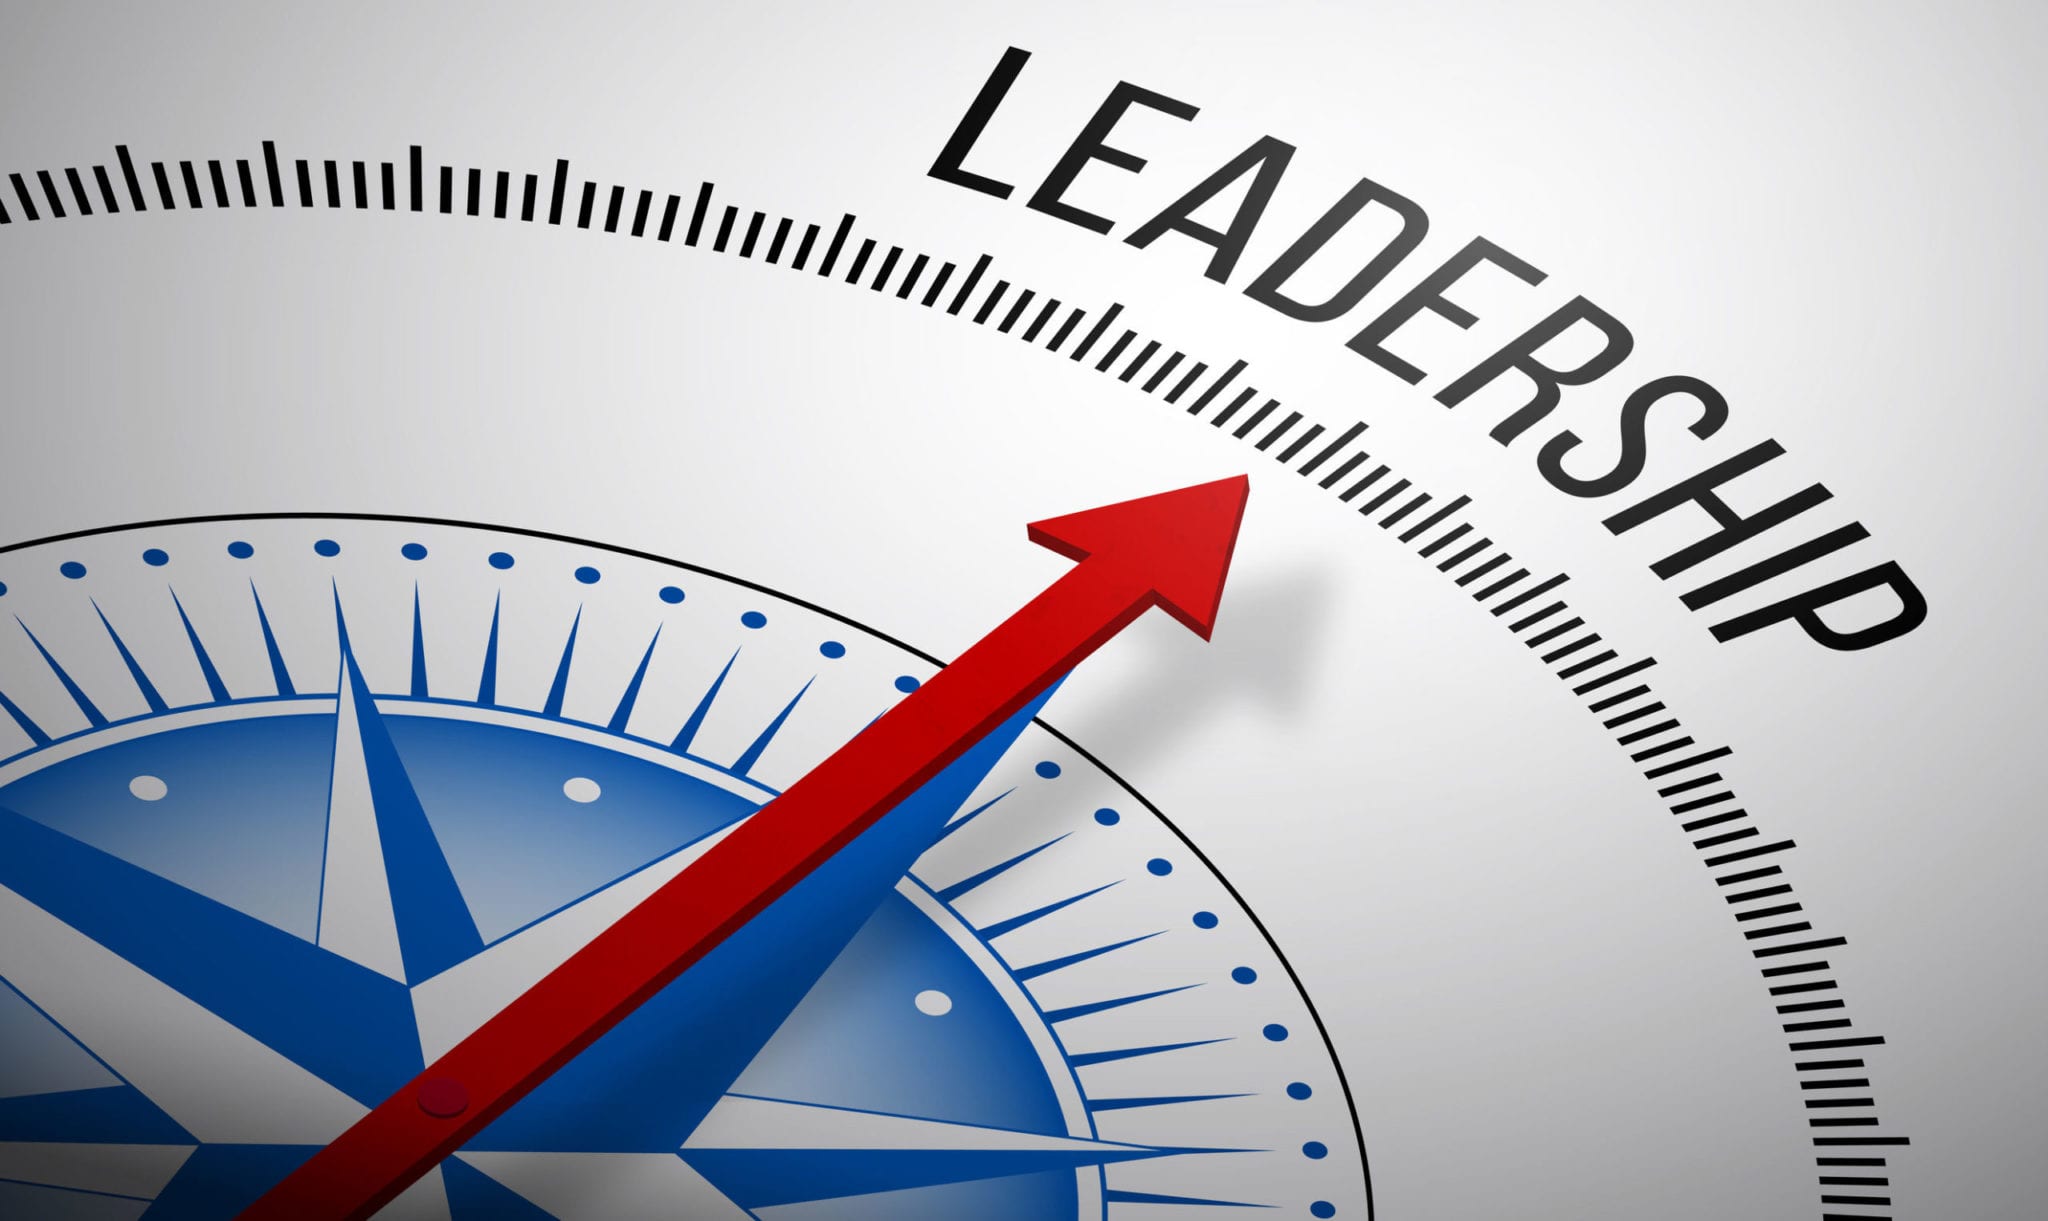 Word "Leadership" above a compass needle